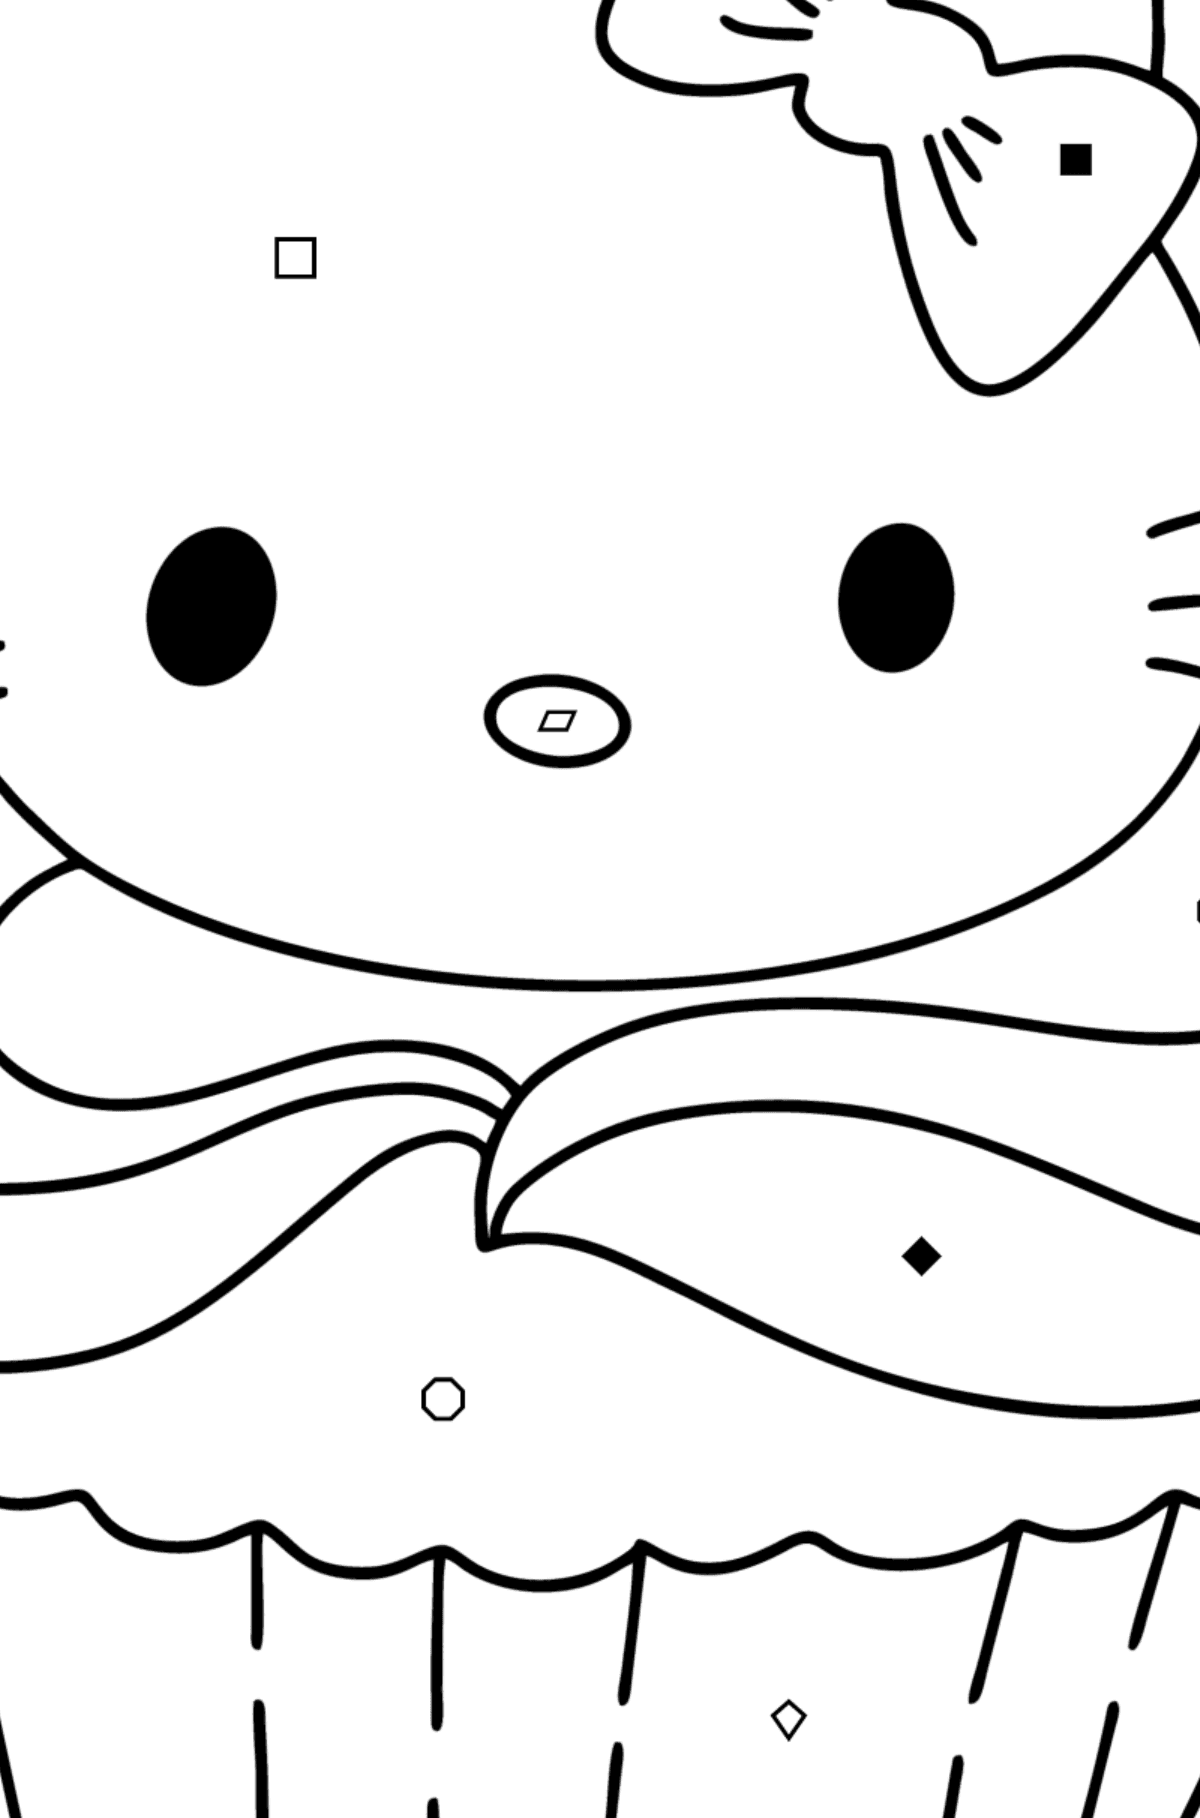 Hello Kitty cupcake coloring page - Coloring by Symbols and Geometric Shapes for Kids